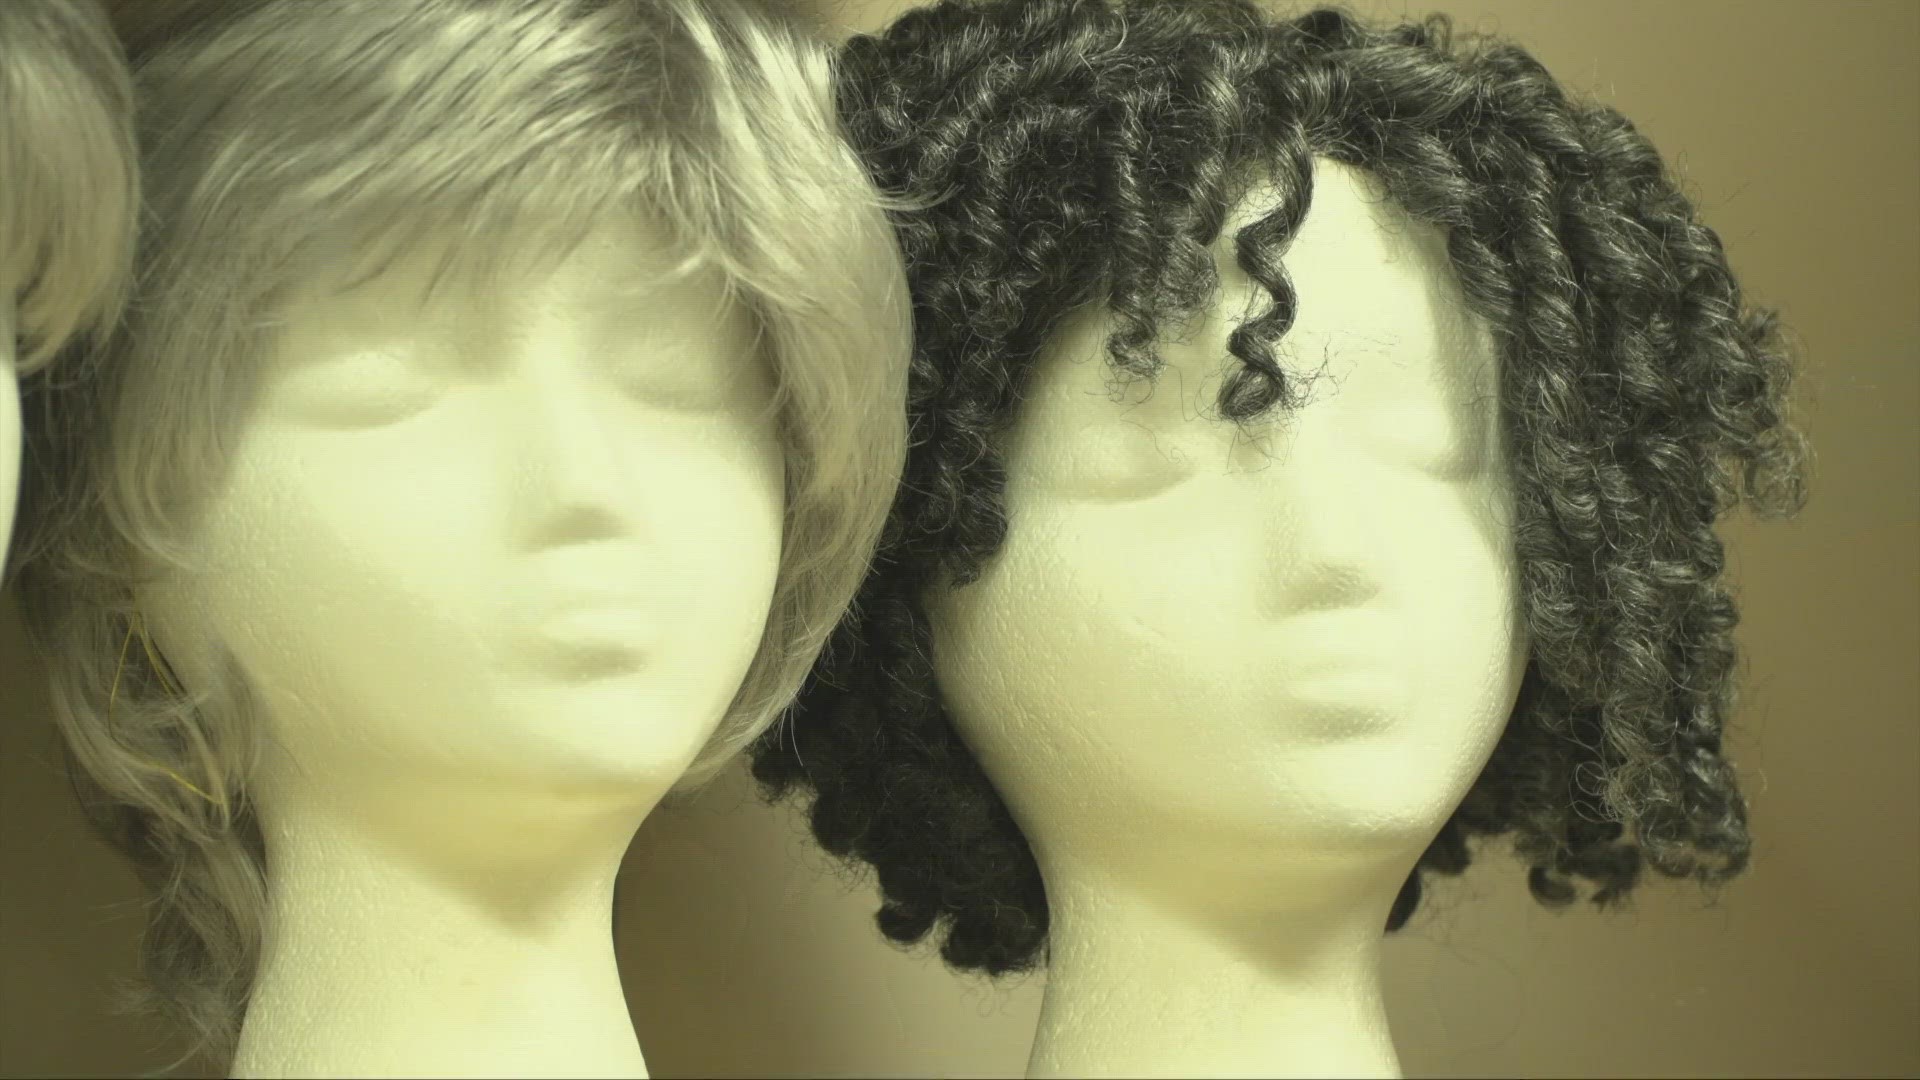 3News' Danielle Wiggins has partnered with Regina Brett and The Gathering Place to help create the traveling wig salon.